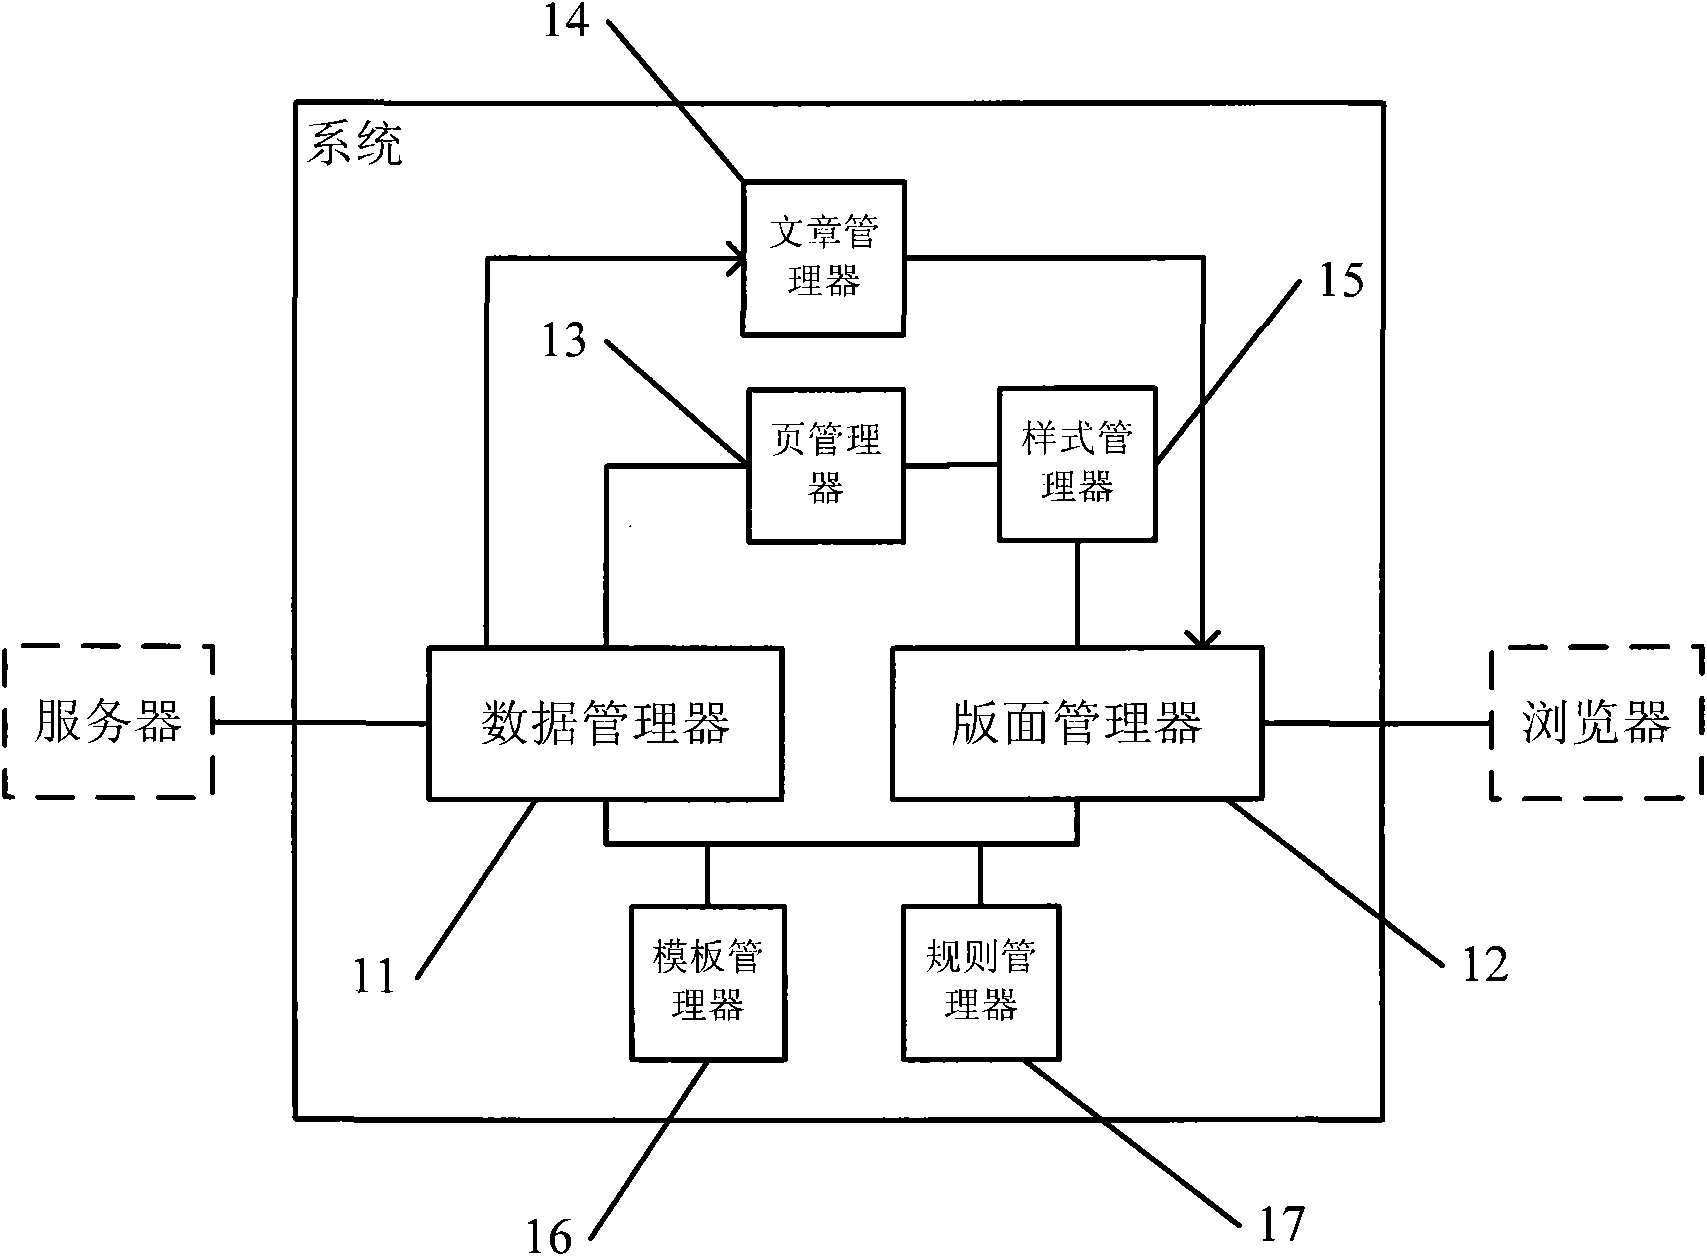 Browser-based system and method for content edition and issue